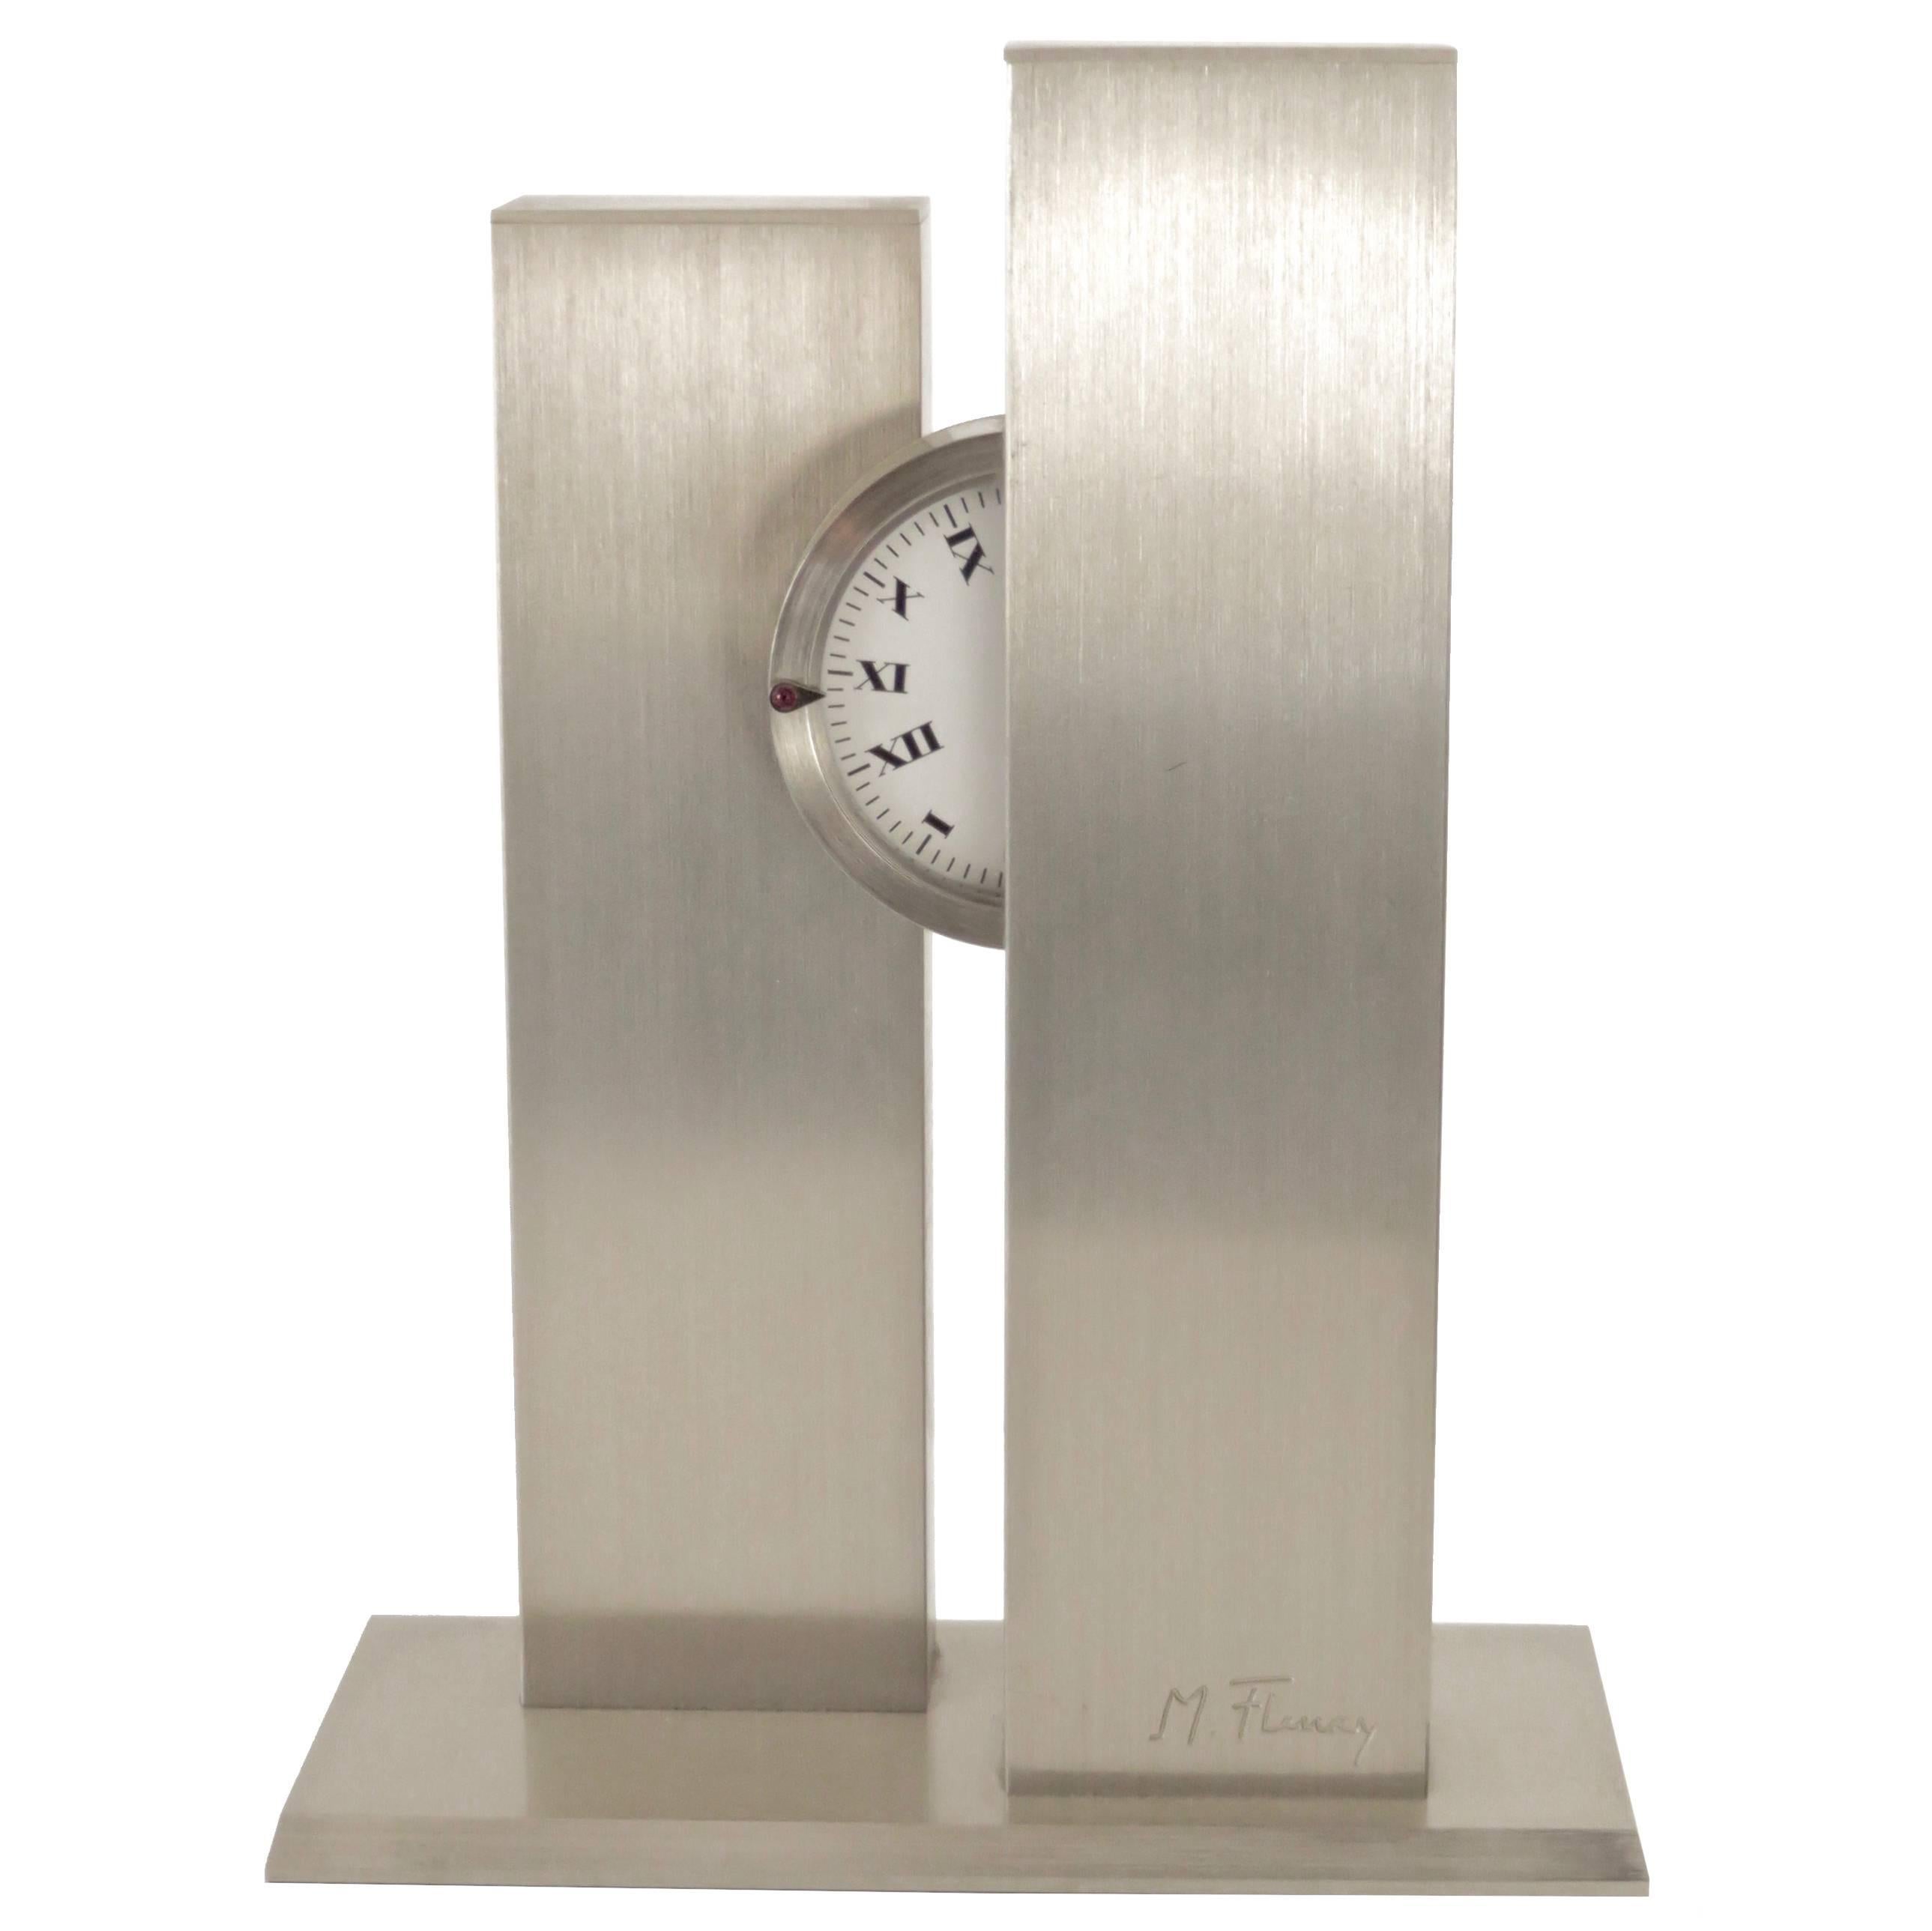 French Sculptural c1970s Stainless Steel Clock by Michel Fleury